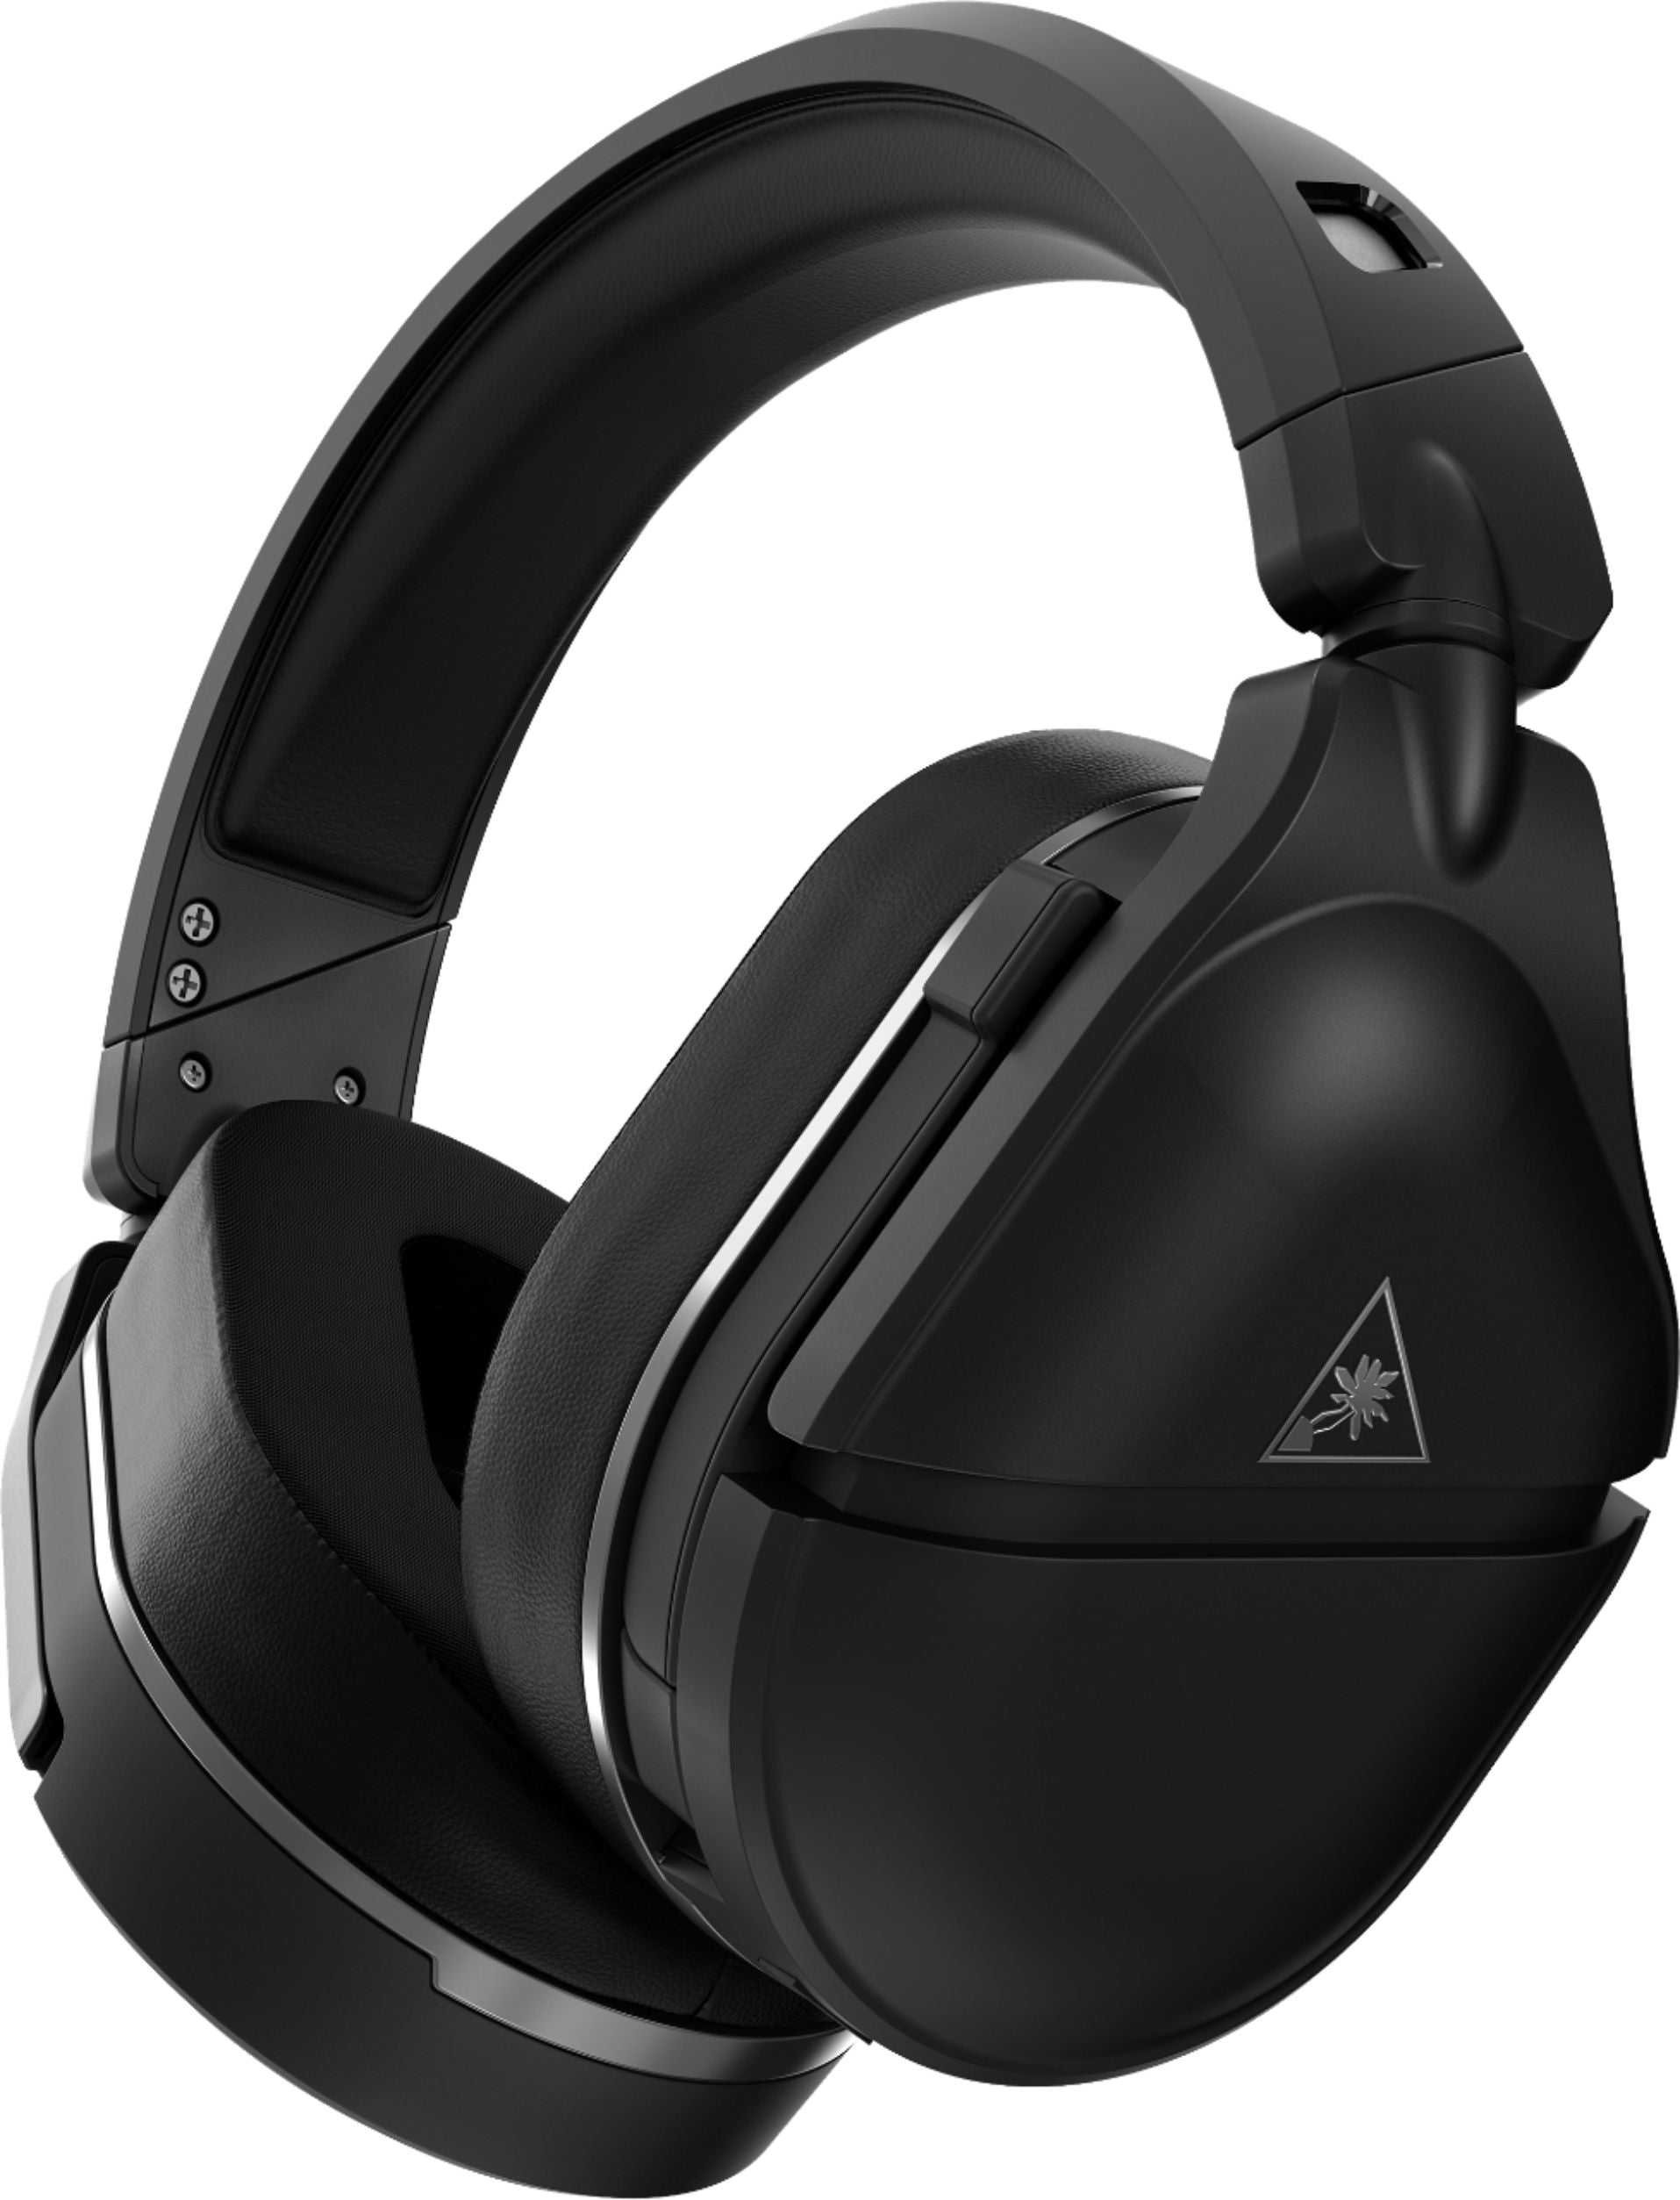 Turtle Beach - TBS-2780-01 Stealth 700 Gen 2 Premium Wireless Gaming Headset for Xbox One and Xbox Series X|S - Black/Silver